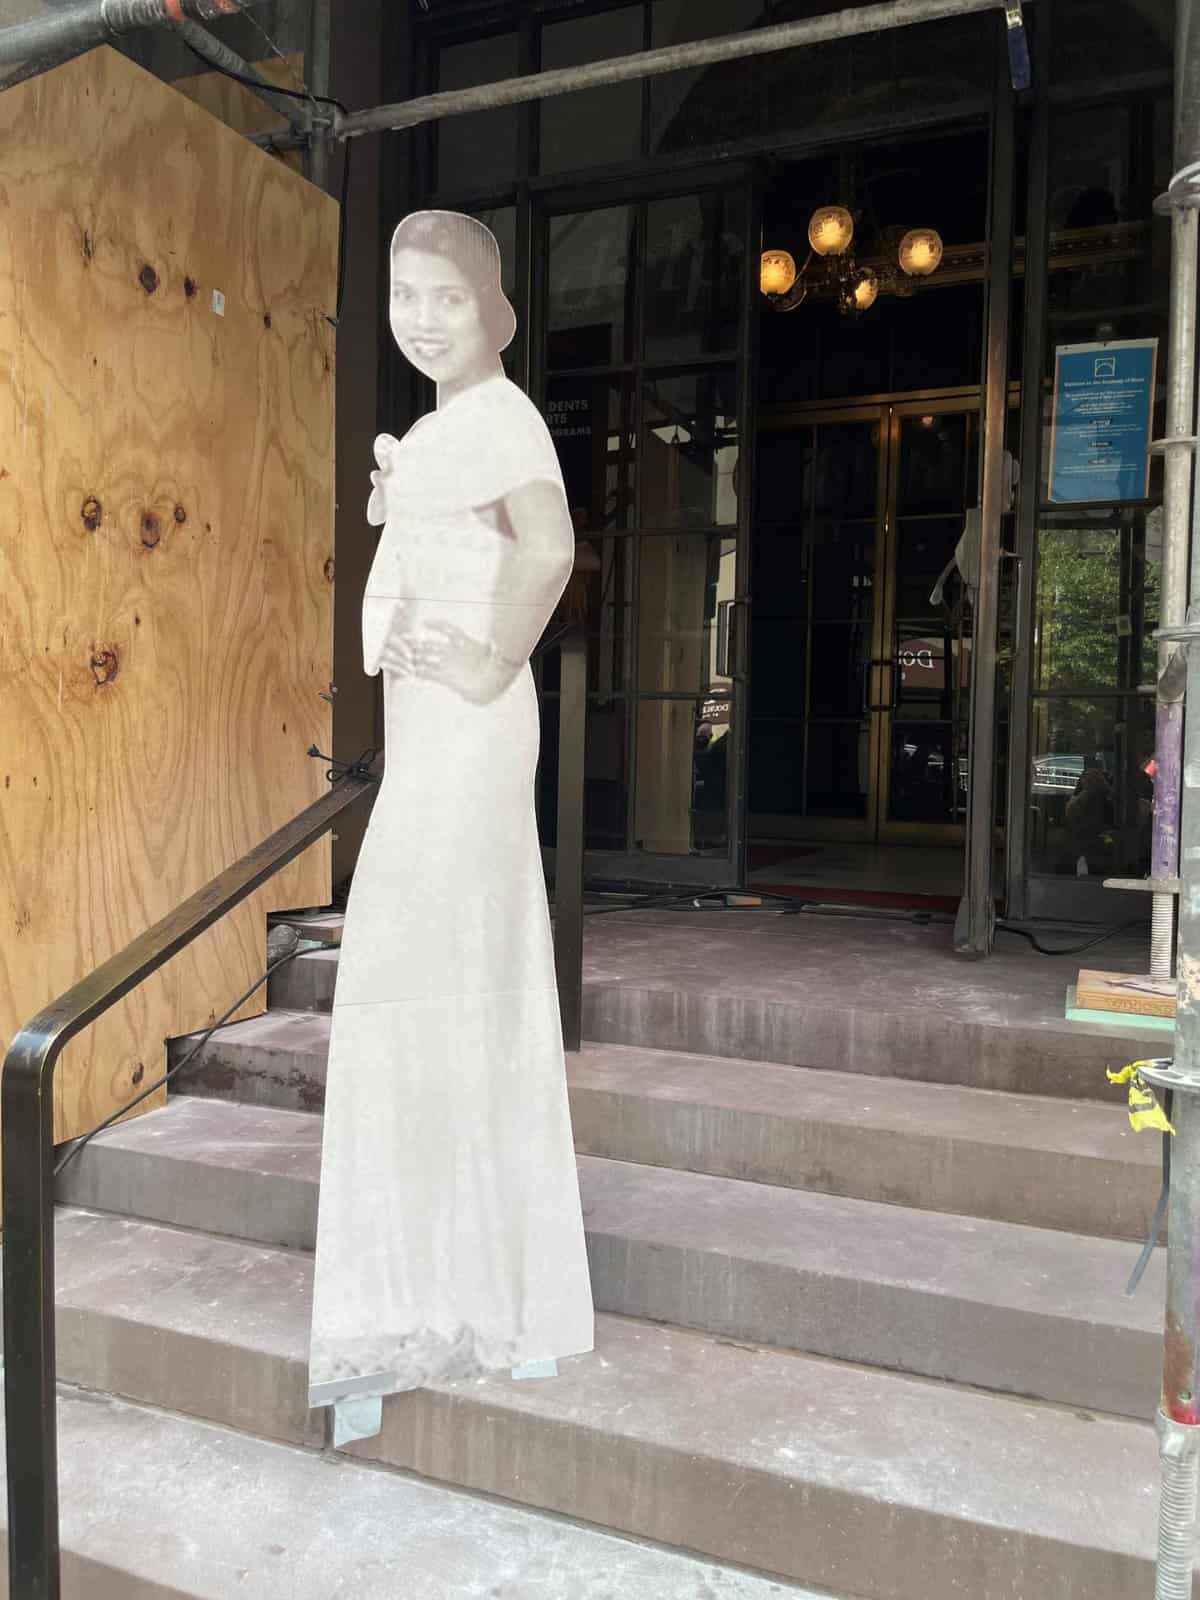 Marian Anderson statue will grace Broad Street